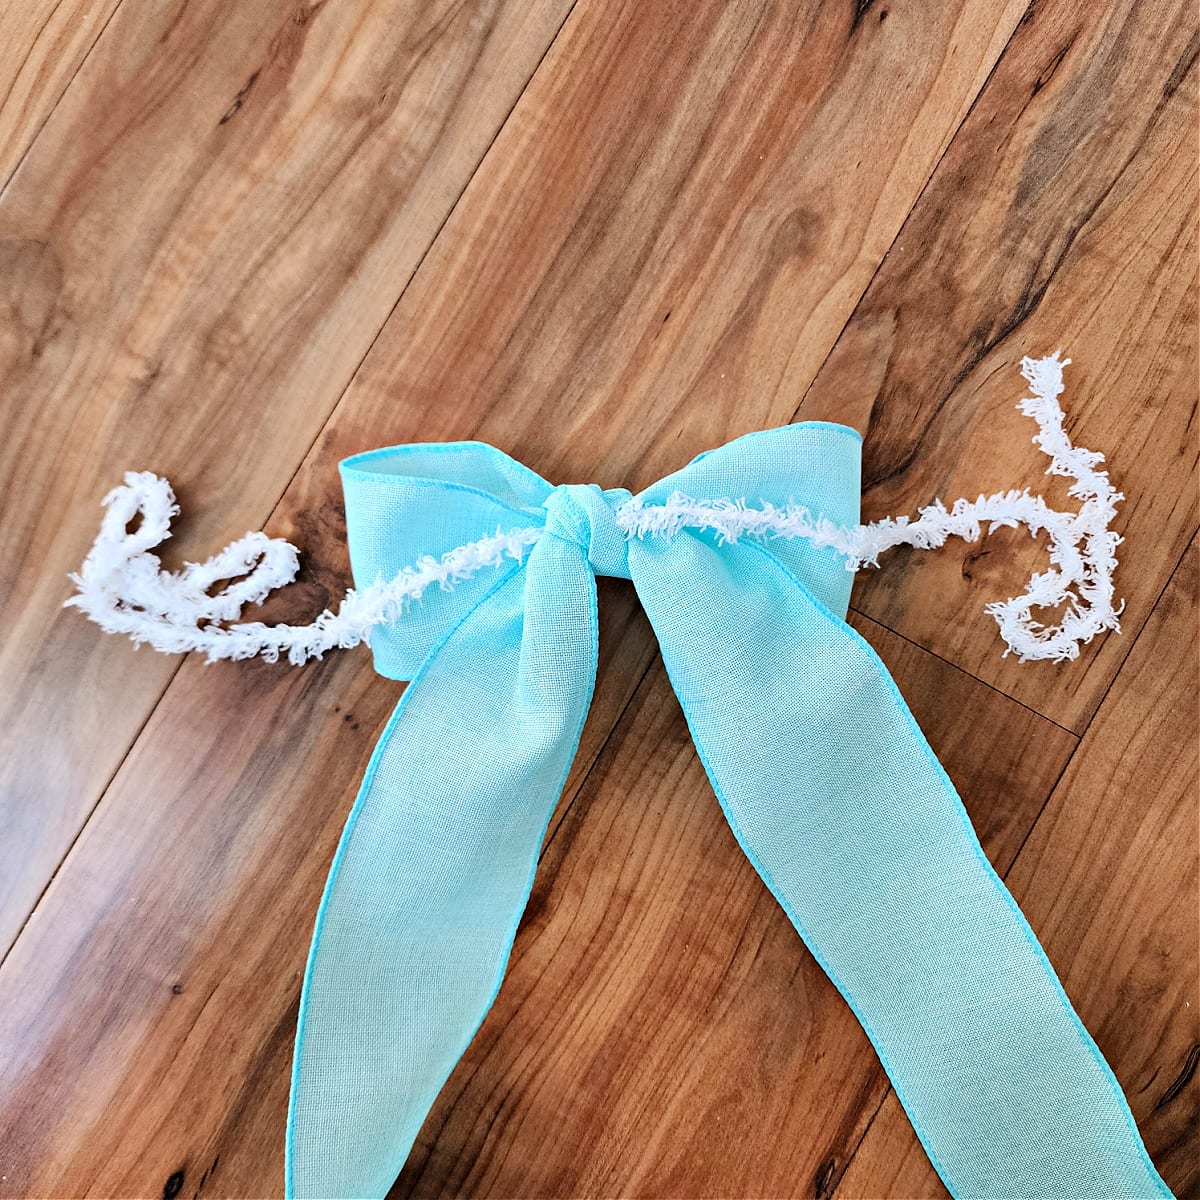 Blue bow with yarn attached ready to be attached to crochet bunny wreath.